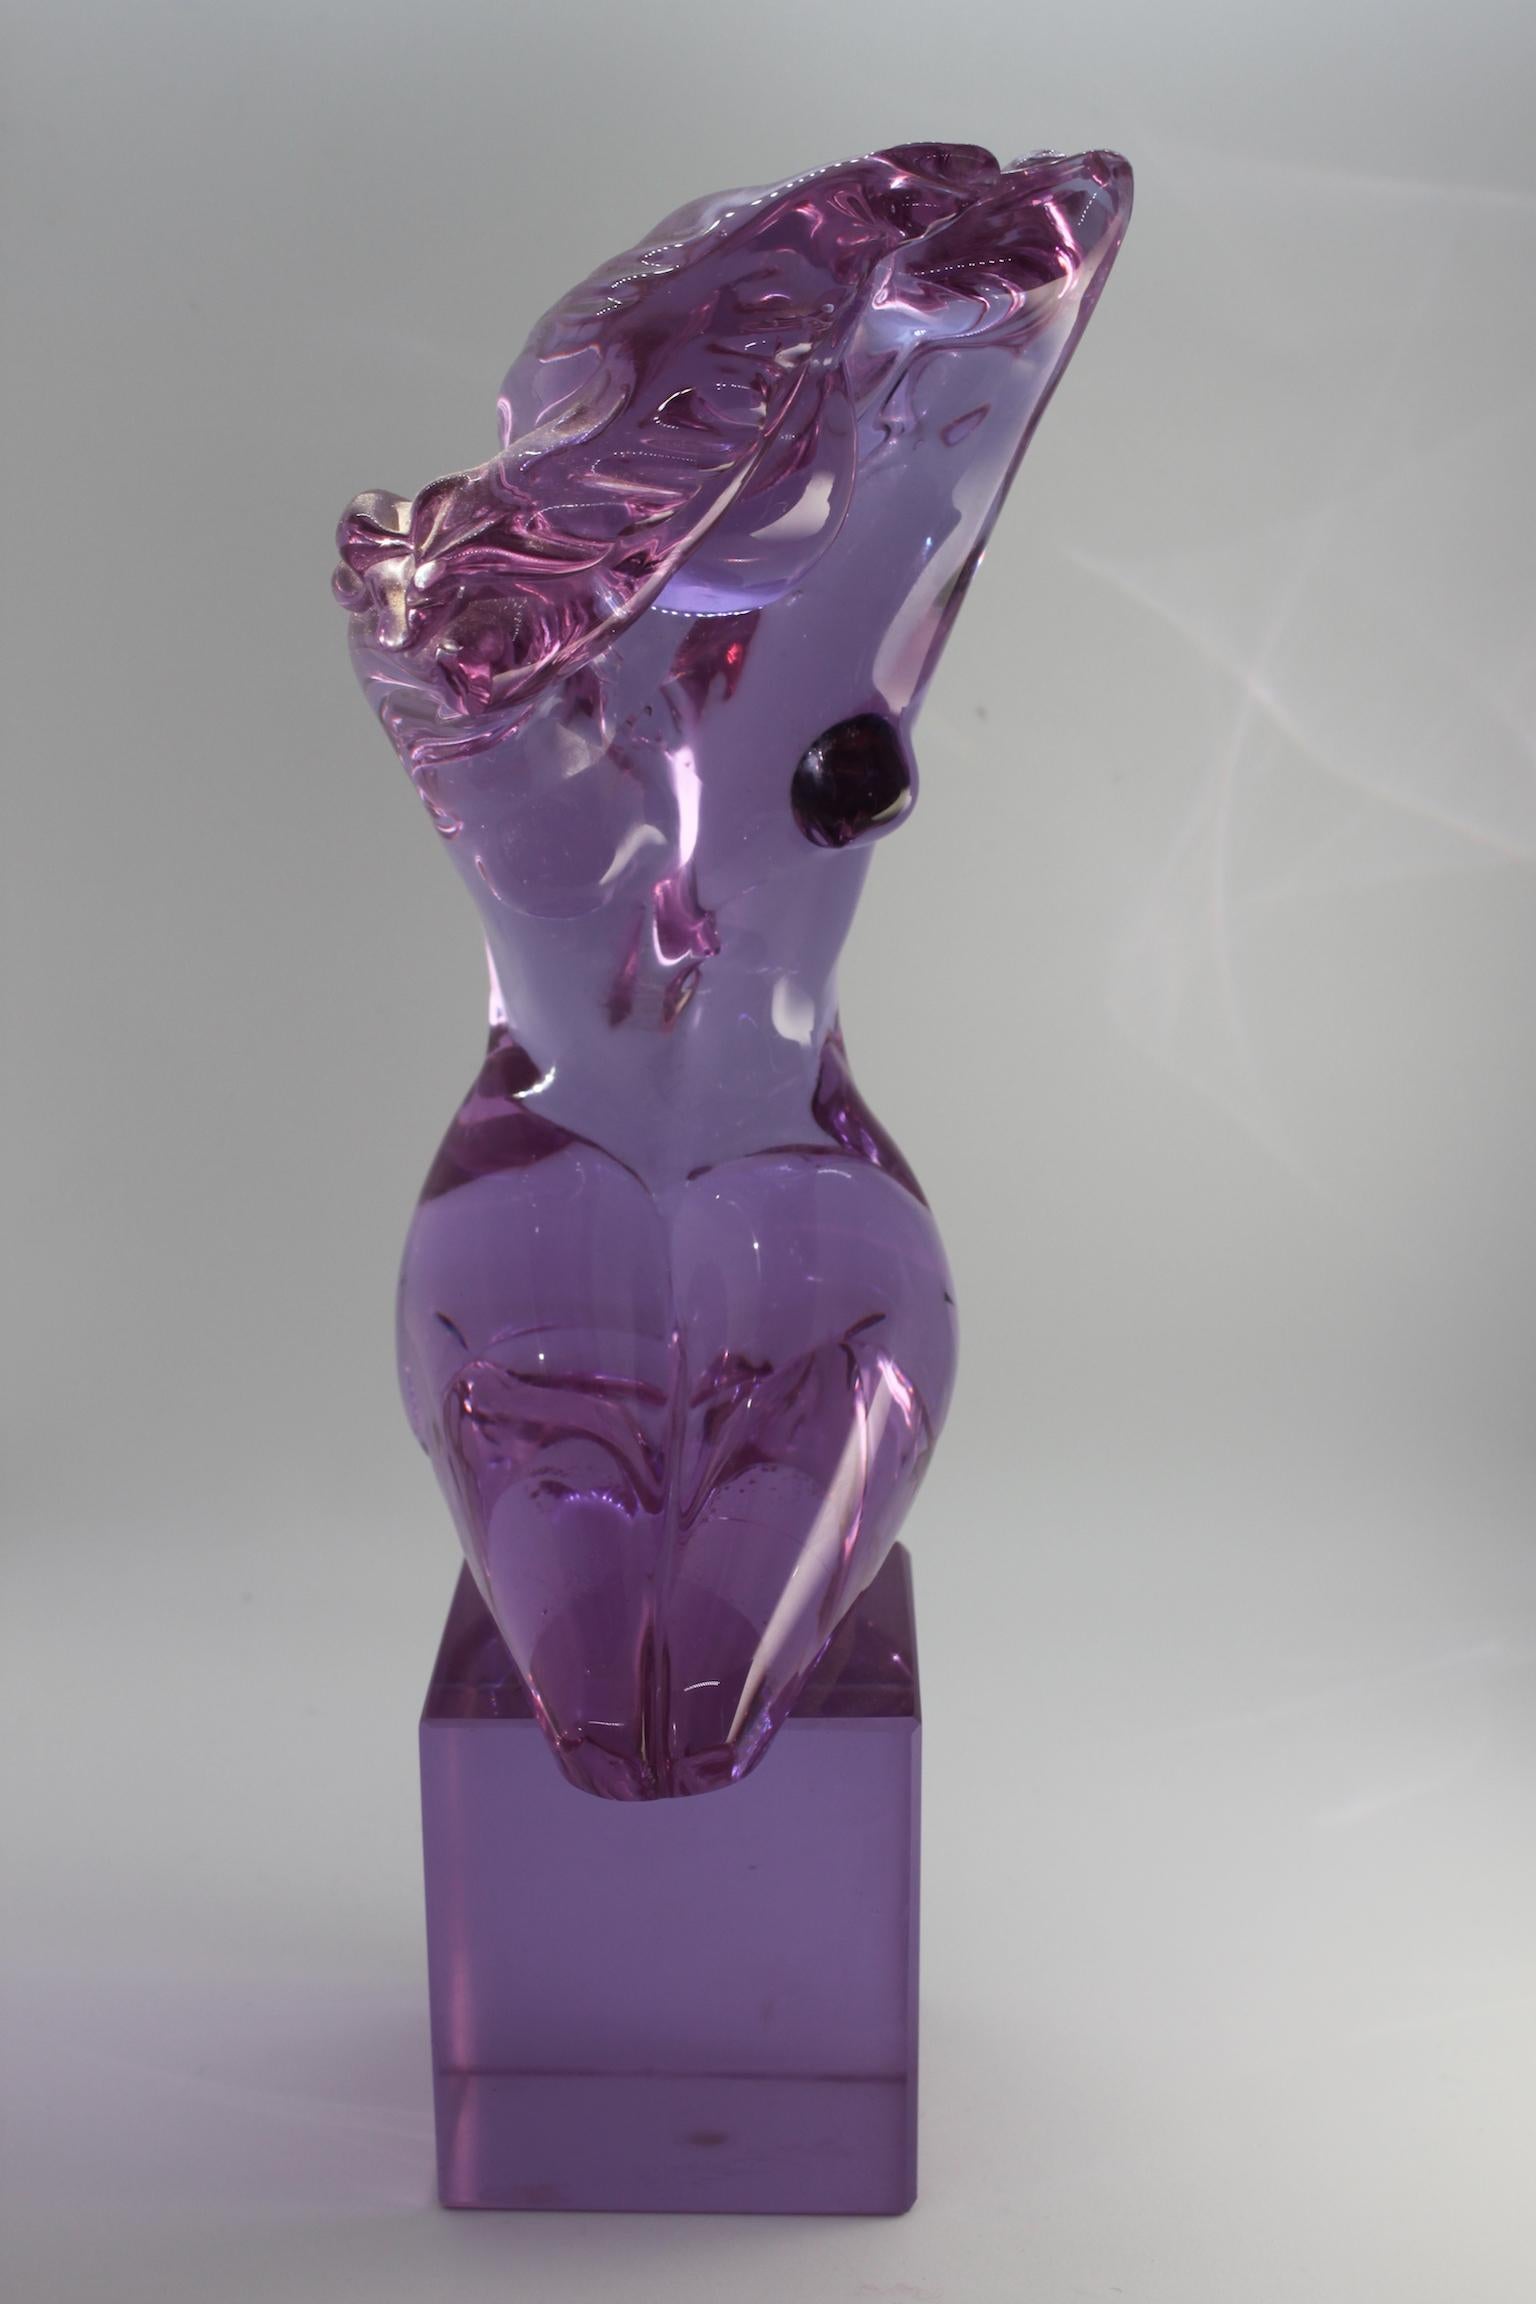 Glass sculpture representing a woman, 20th century. 
In a perfect state. 
Signed. 
Dimensions: Height 31cm, width 11cm, depth 15cm.